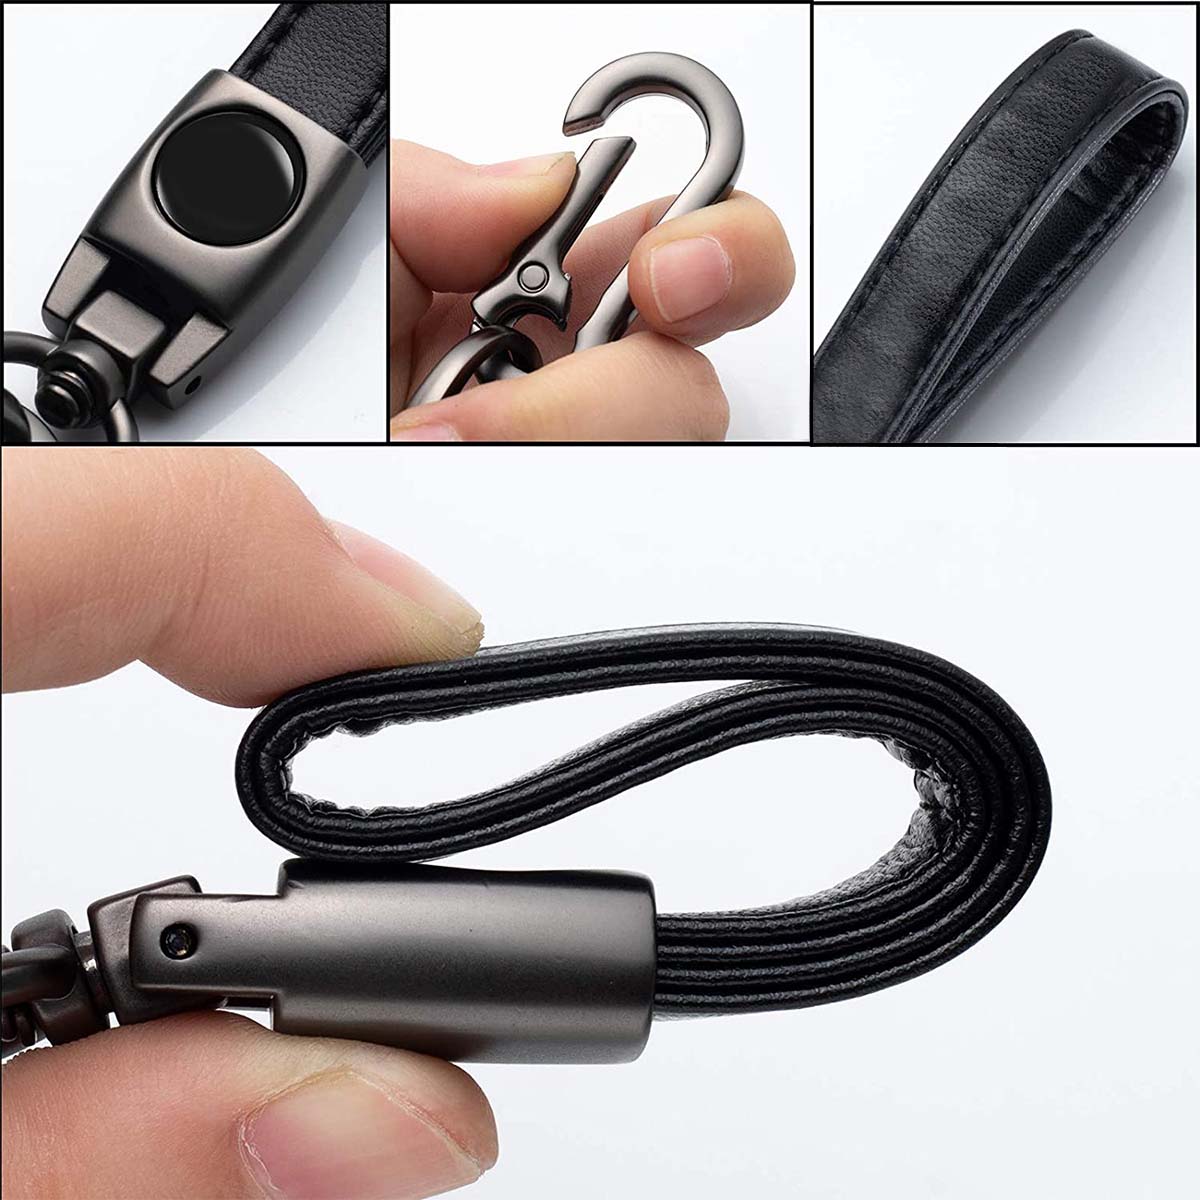 Leather Car Keychain, Custom Fit For Your Cars, Key Chain Keyring Family Present for Man and Woman, Car Accessories FD15986